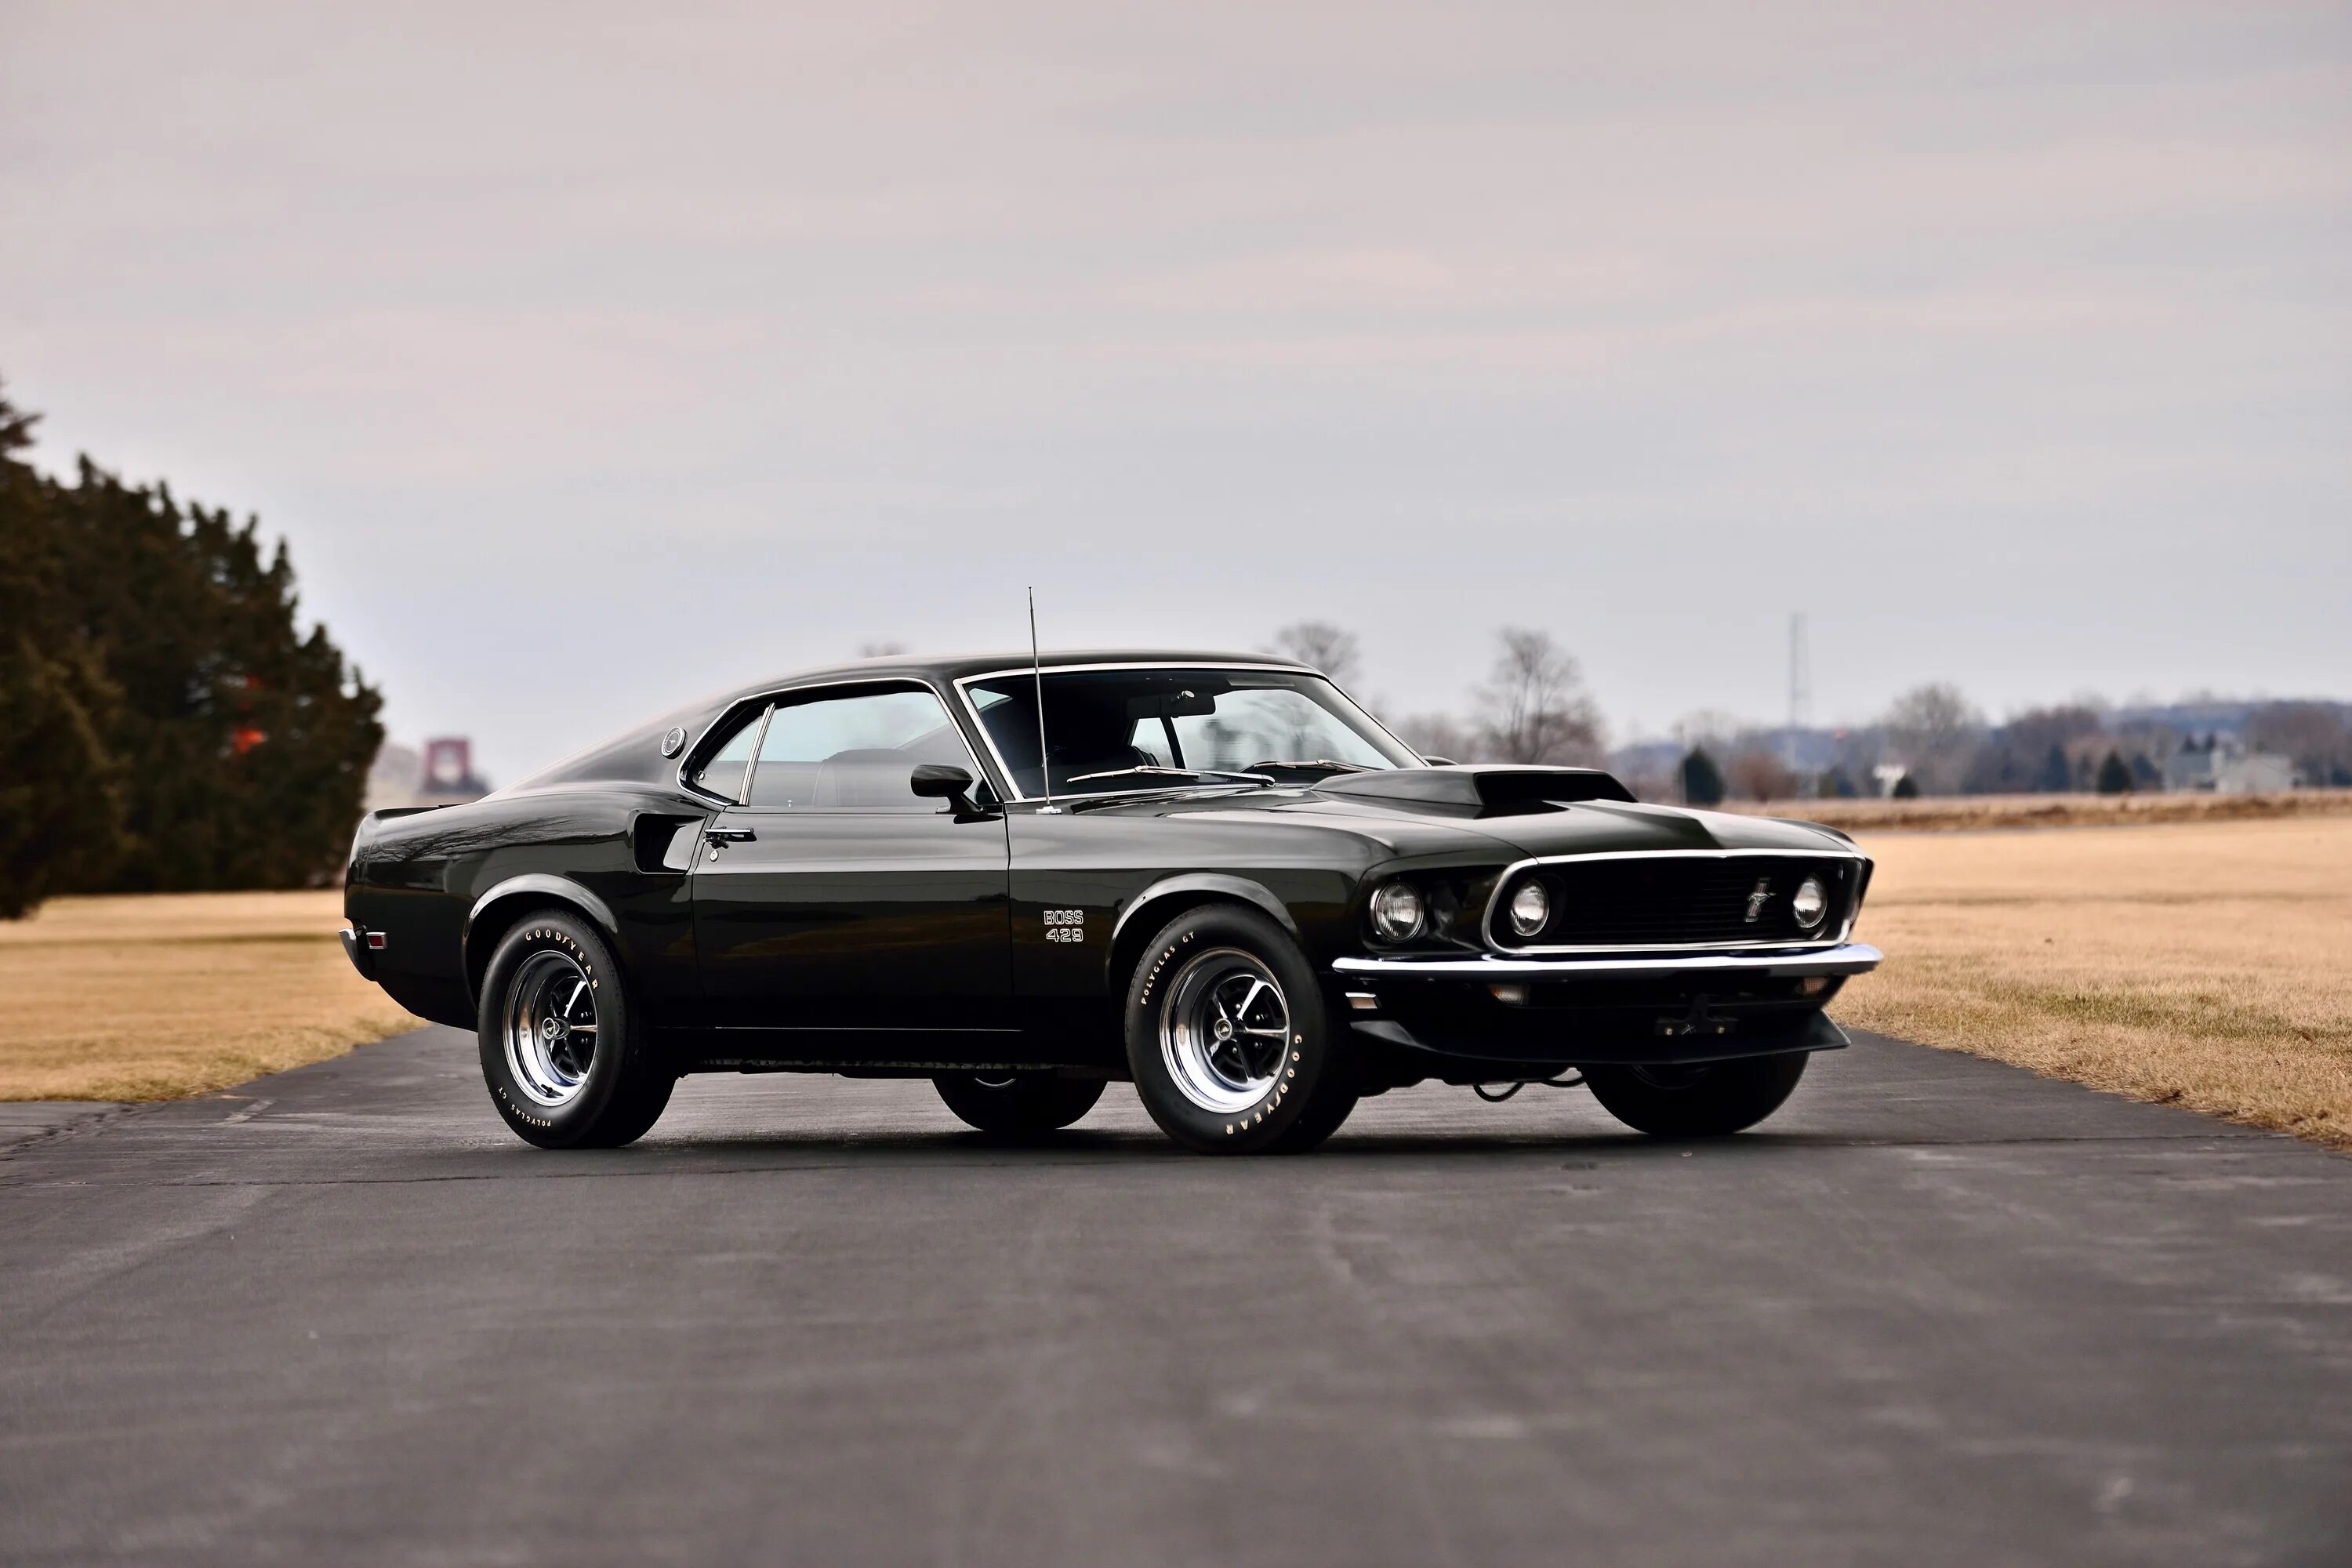 Best old cars. Ford Mustang 1969. Форд Мустанг 1969. Форд Мустанг Boss 429 1969. 1969 Ford Mustang Boss 429 Fastback.